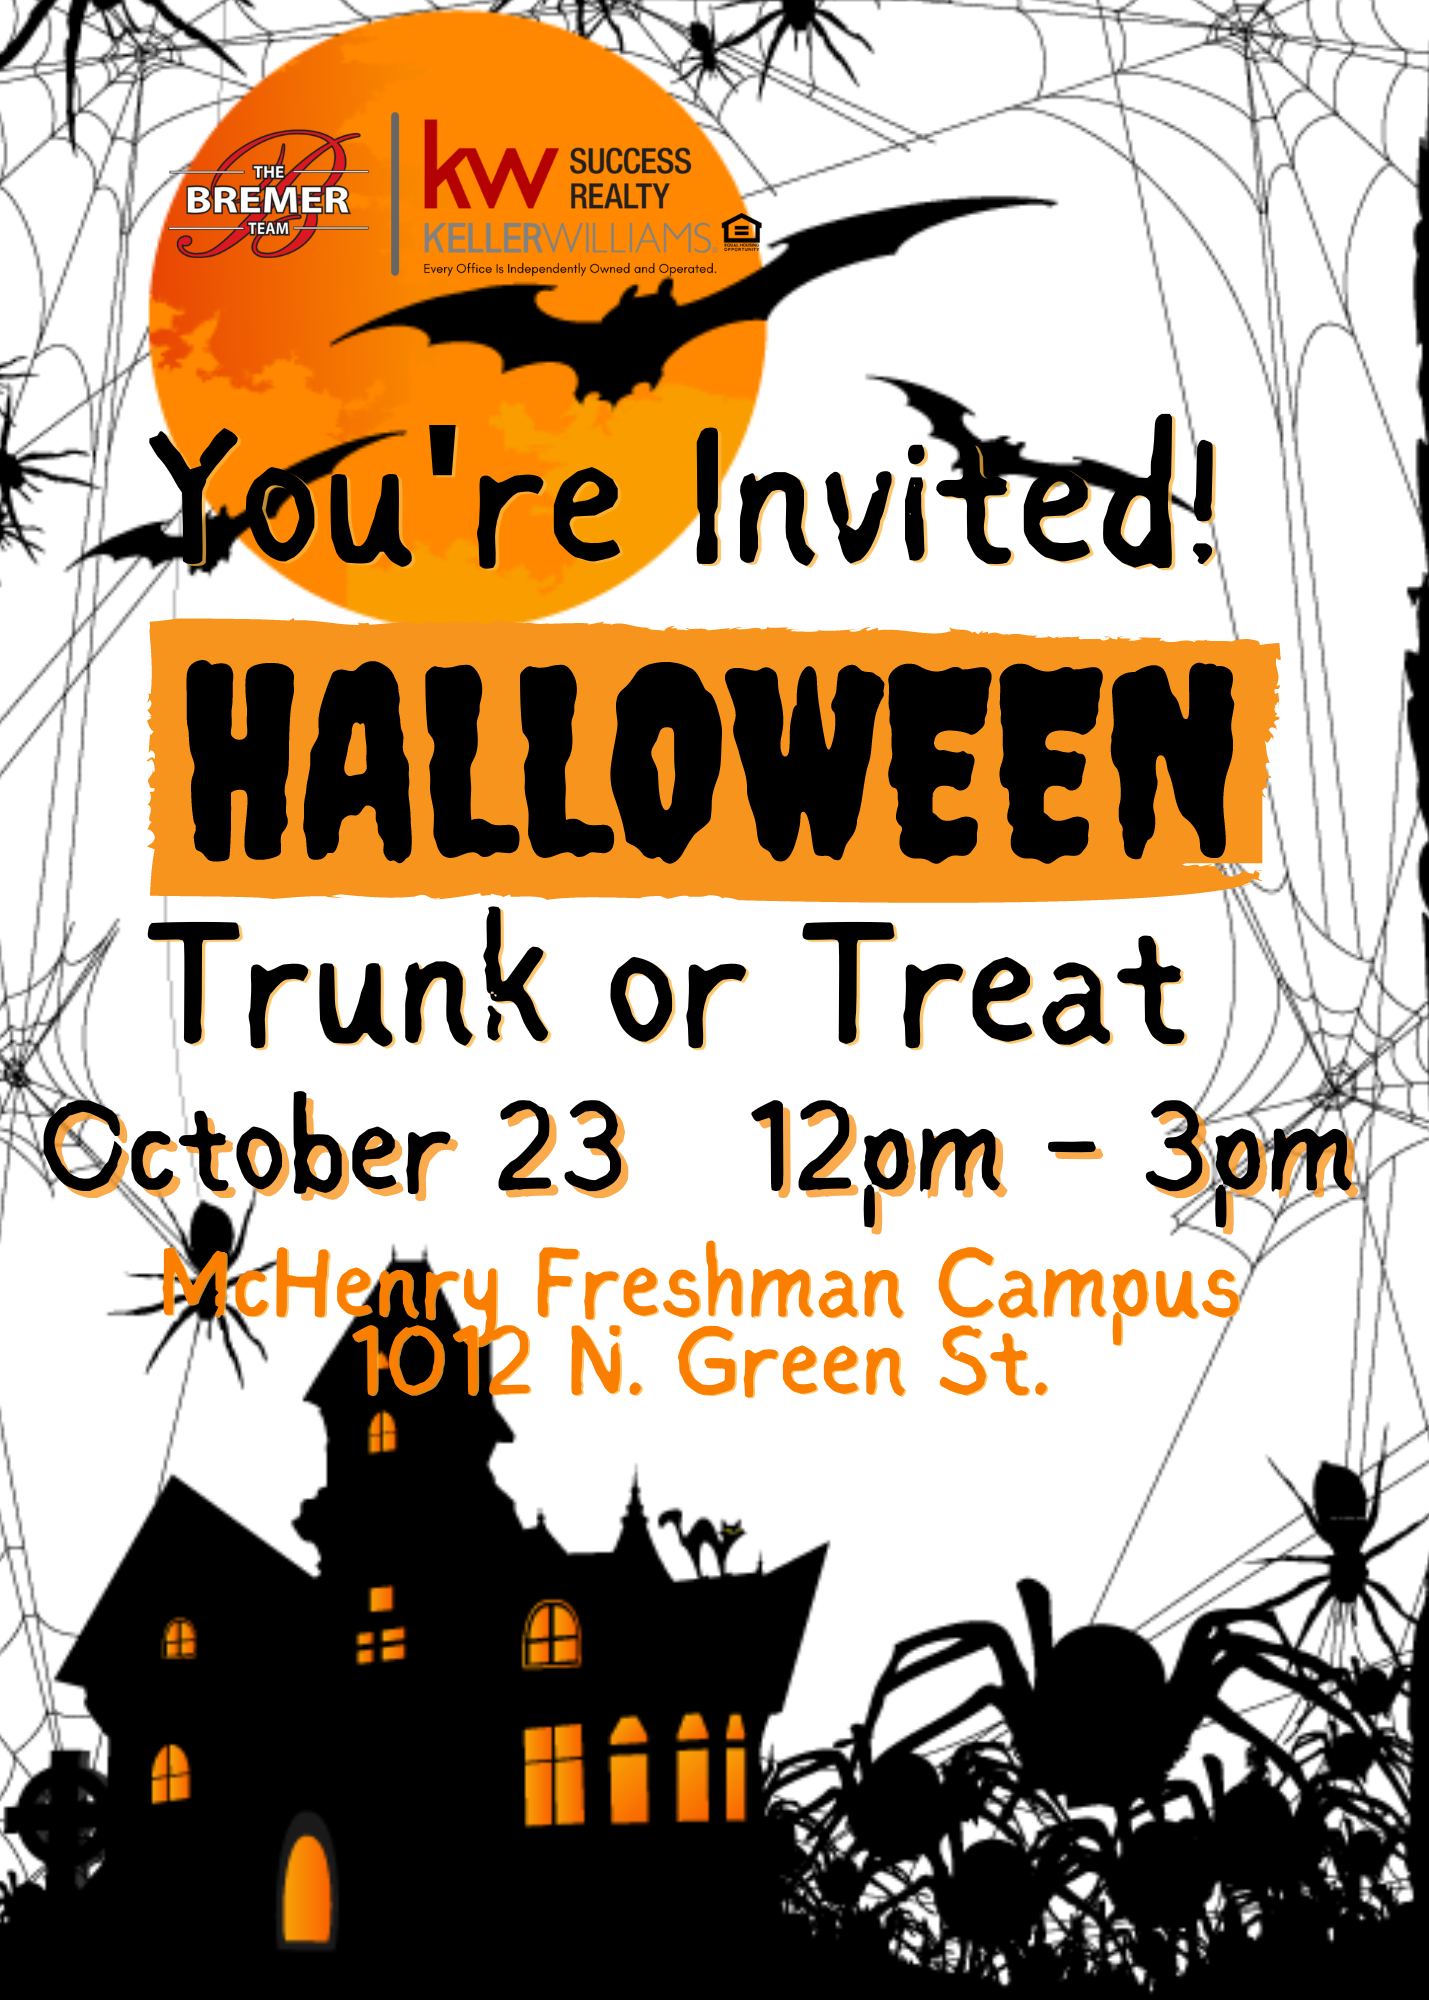 You're INVITED to our Halloween Trunk or Treat! 🎃 Give those costumes a trial run before the big day.